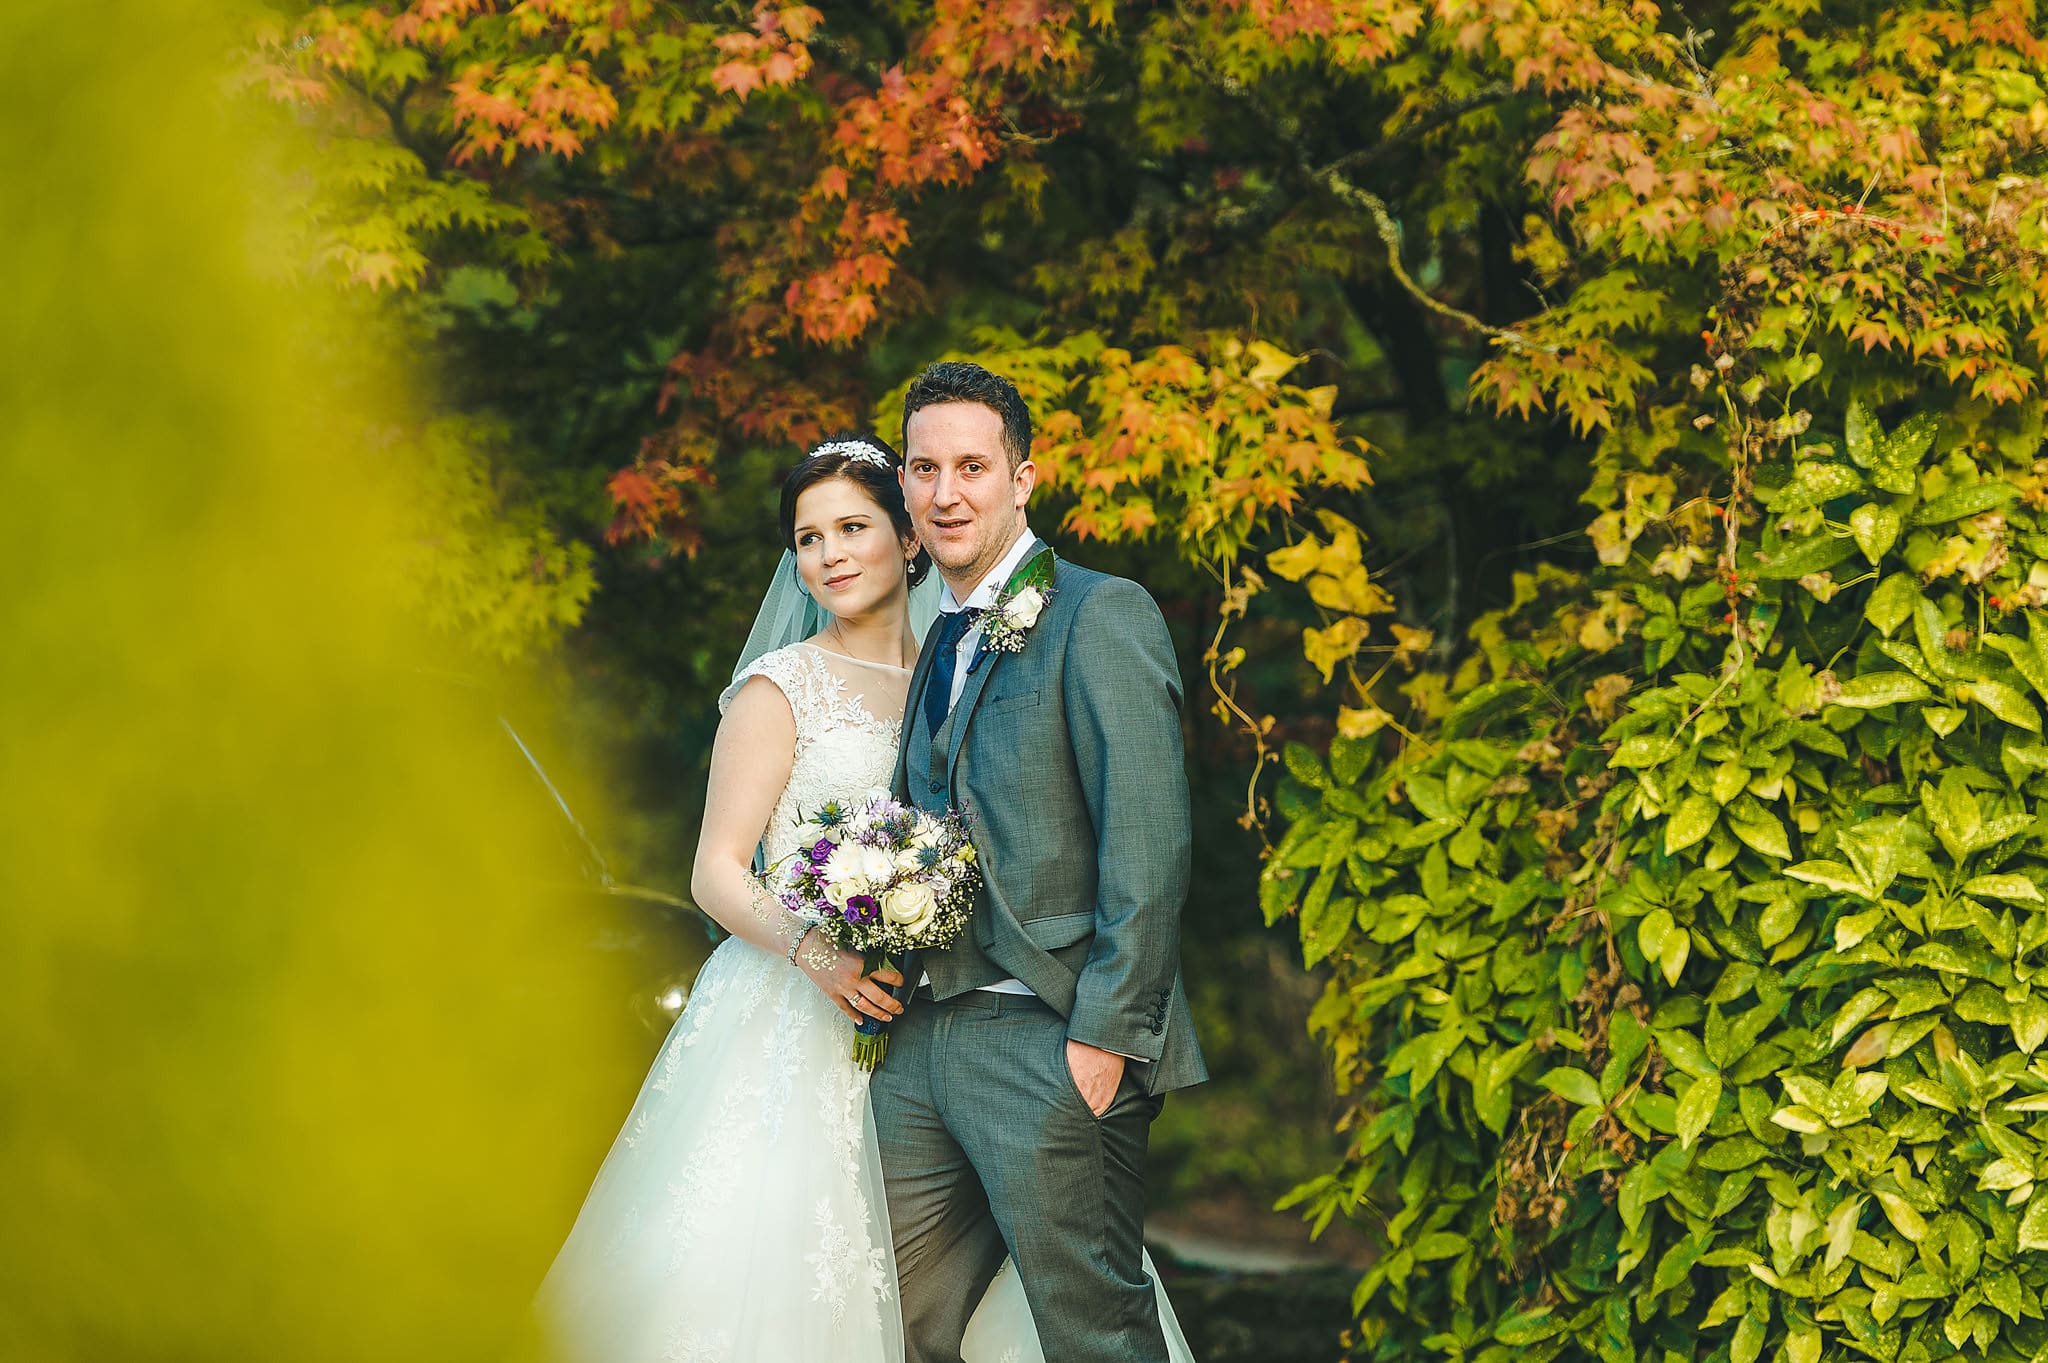 Midlands wedding photography - 2015 Review 34